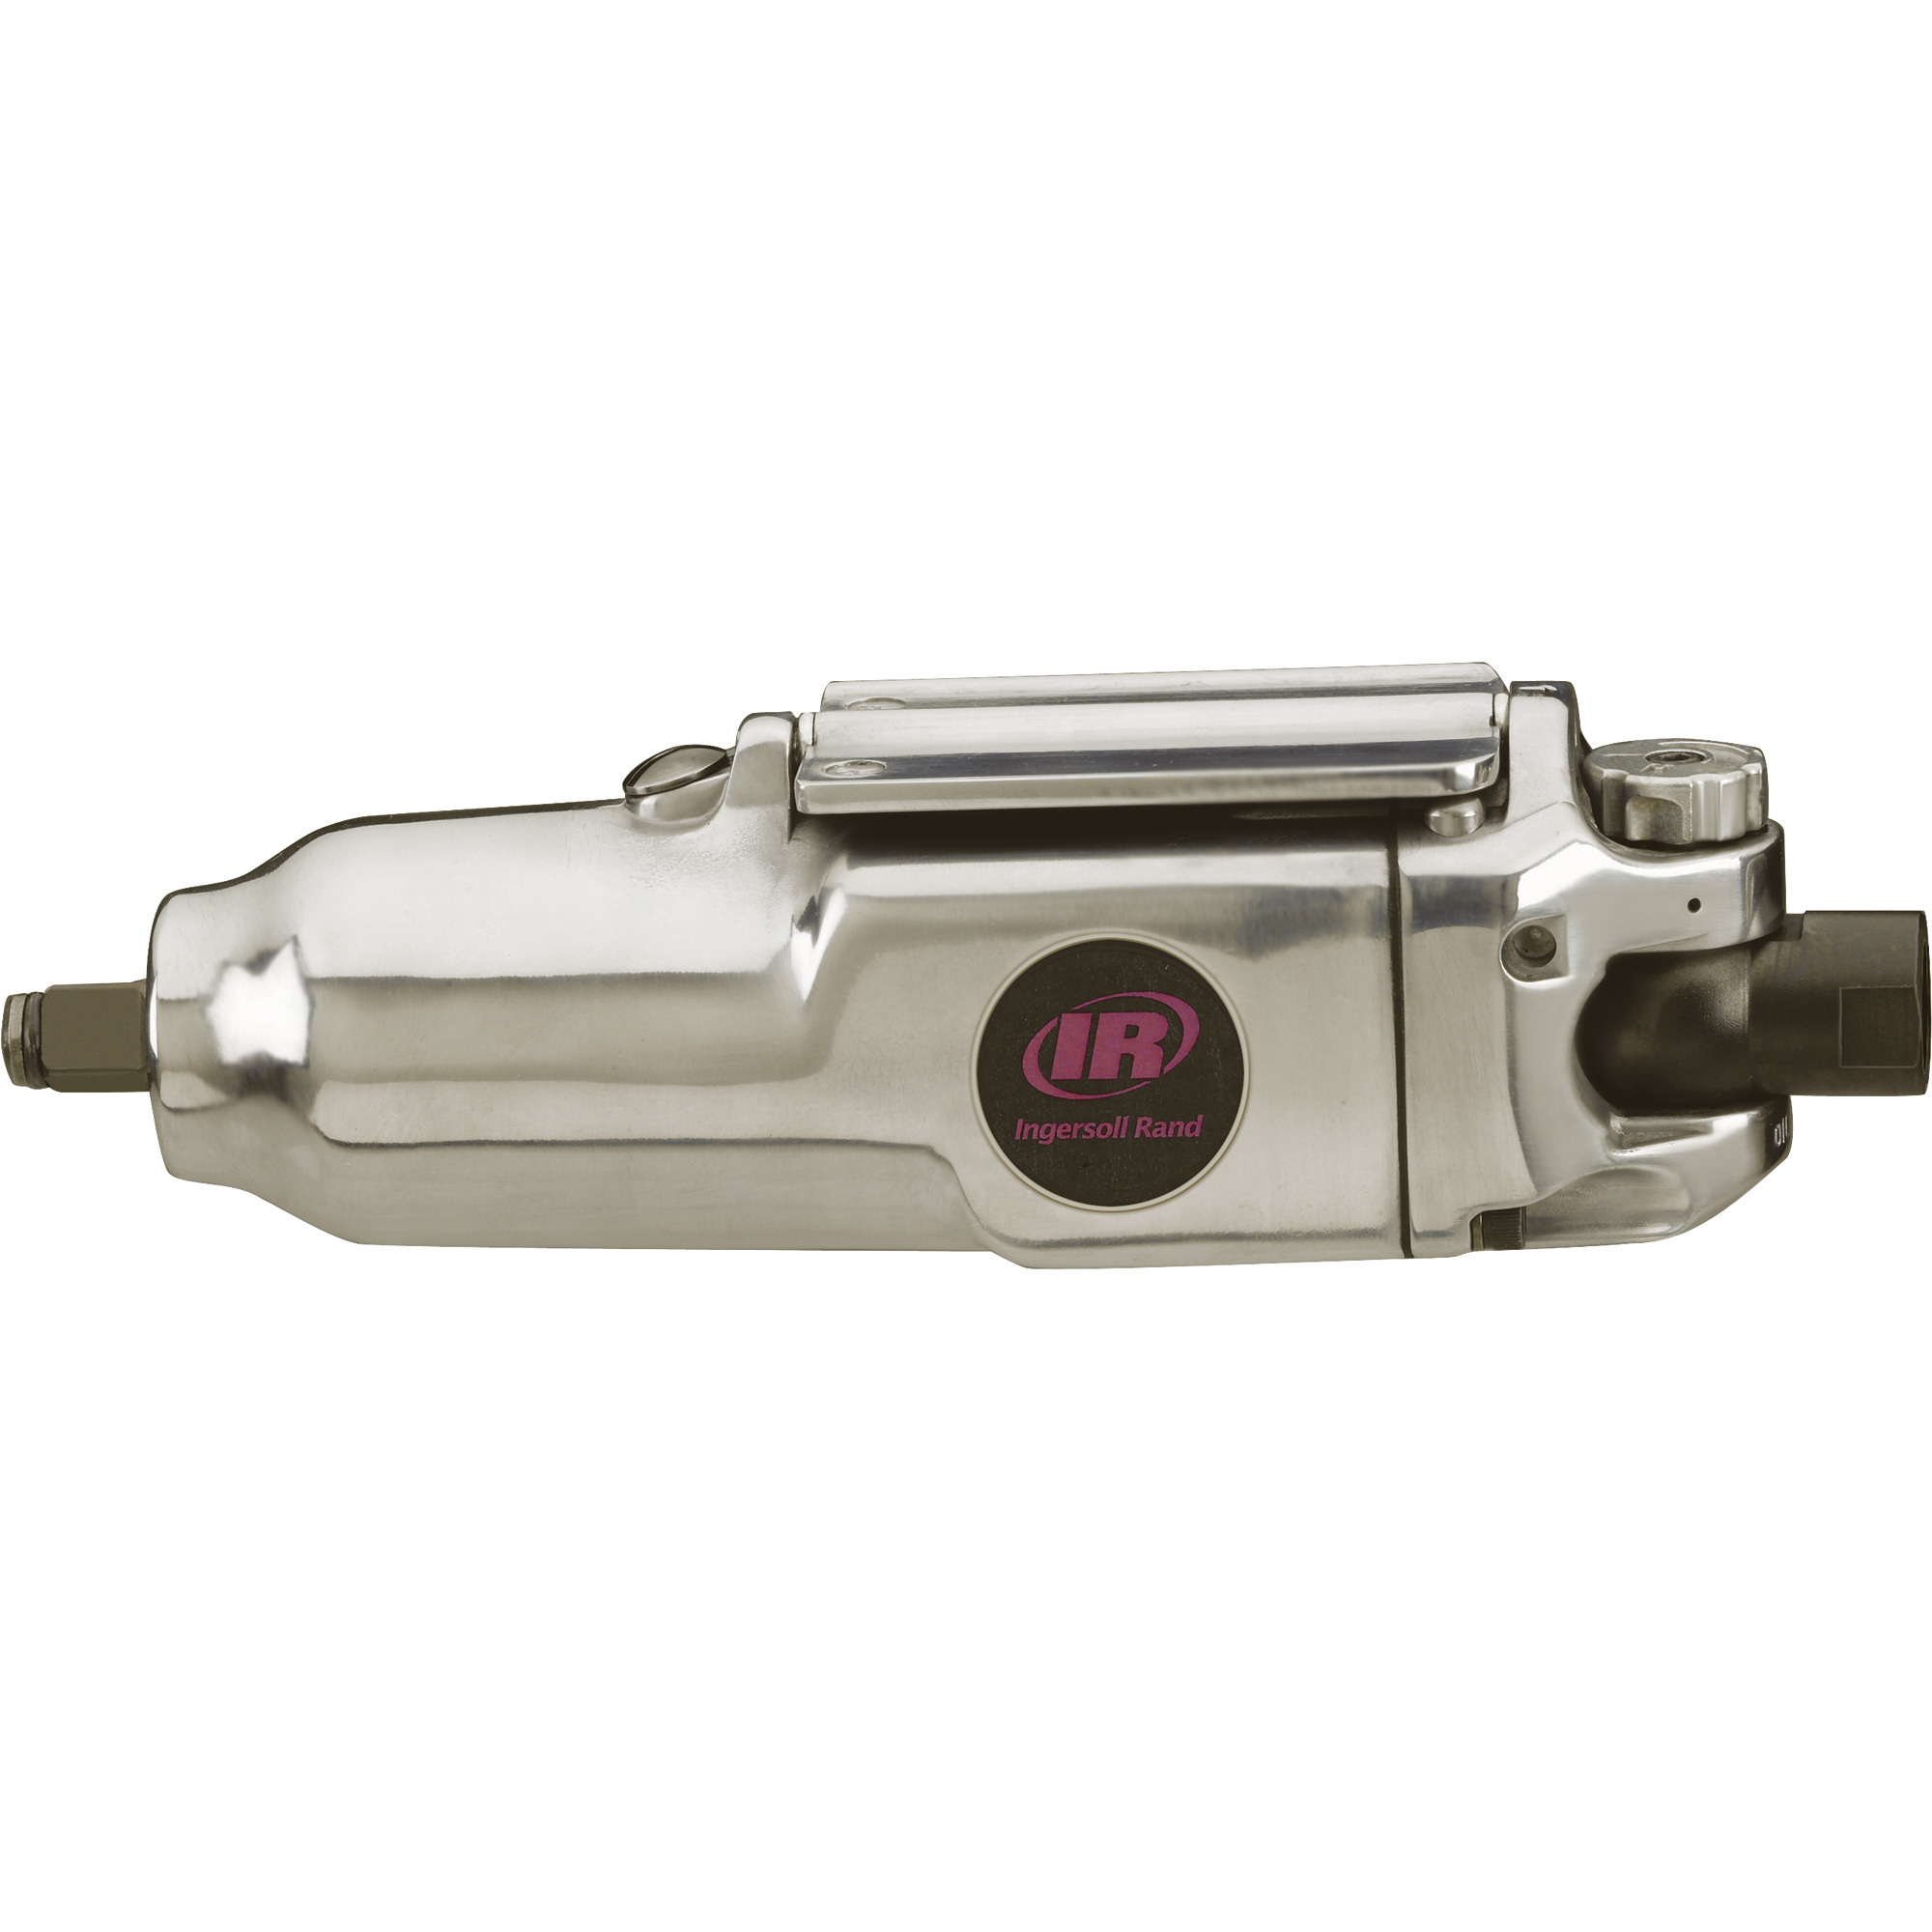 Ingersoll Rand Air Impact Wrench, 3/8Inch, 3 CFM, 175 Ft./Lbs. Torque, Model 216